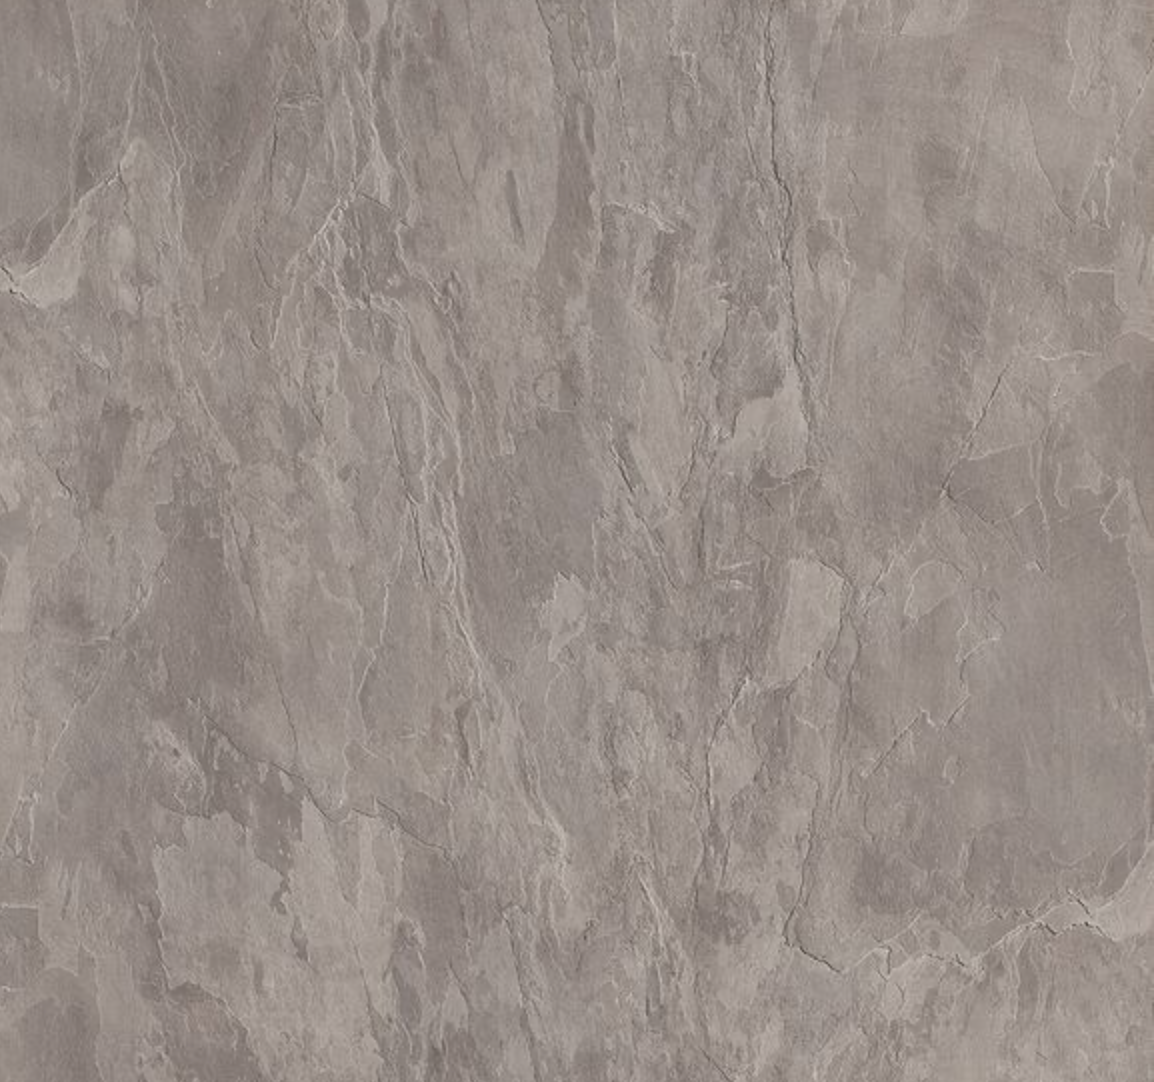 Showerwall Laminate Quarry Collection - Moonstone